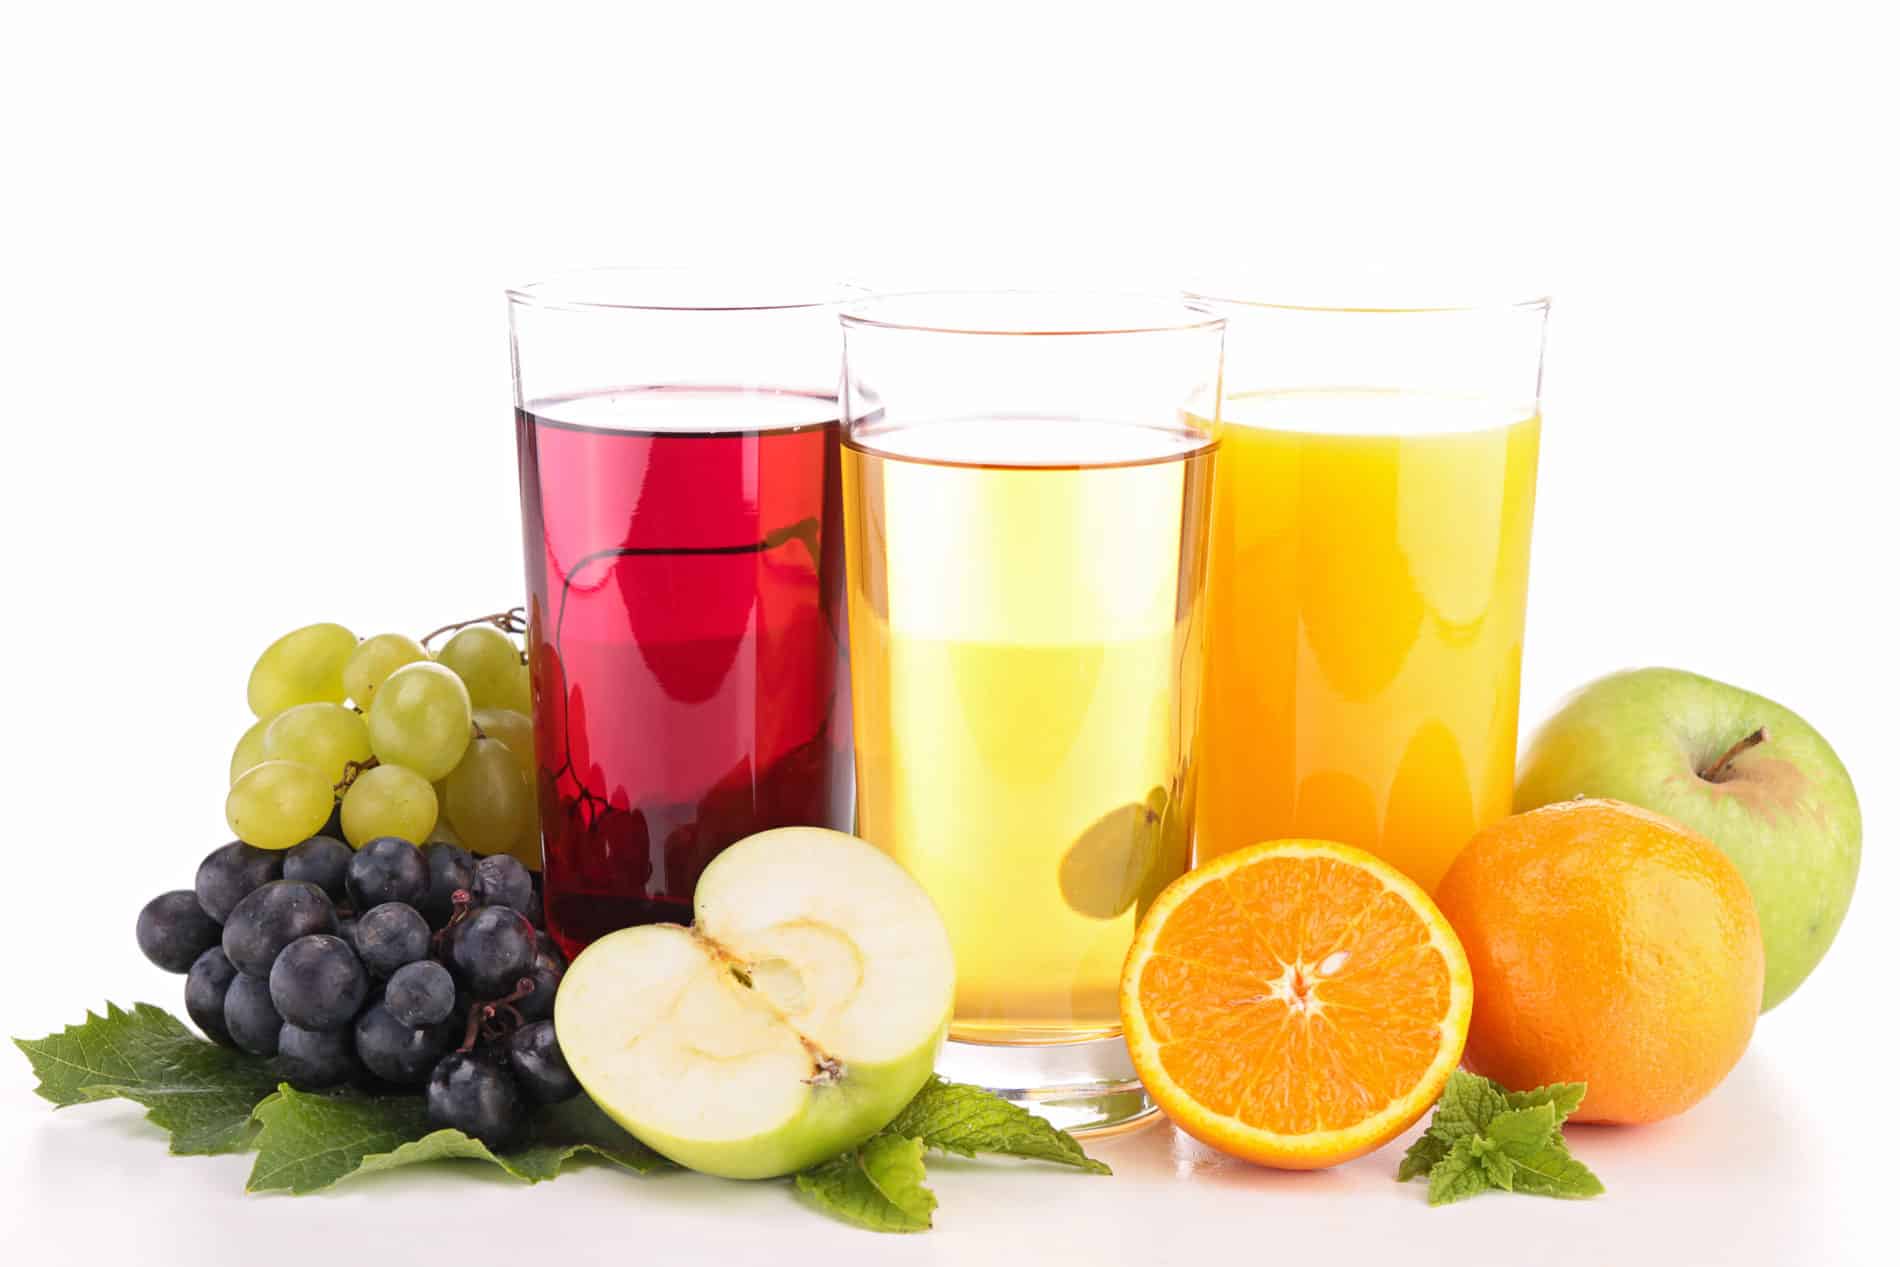 Keep Your Immunity Strong: Sip Smarter with 100% Juice